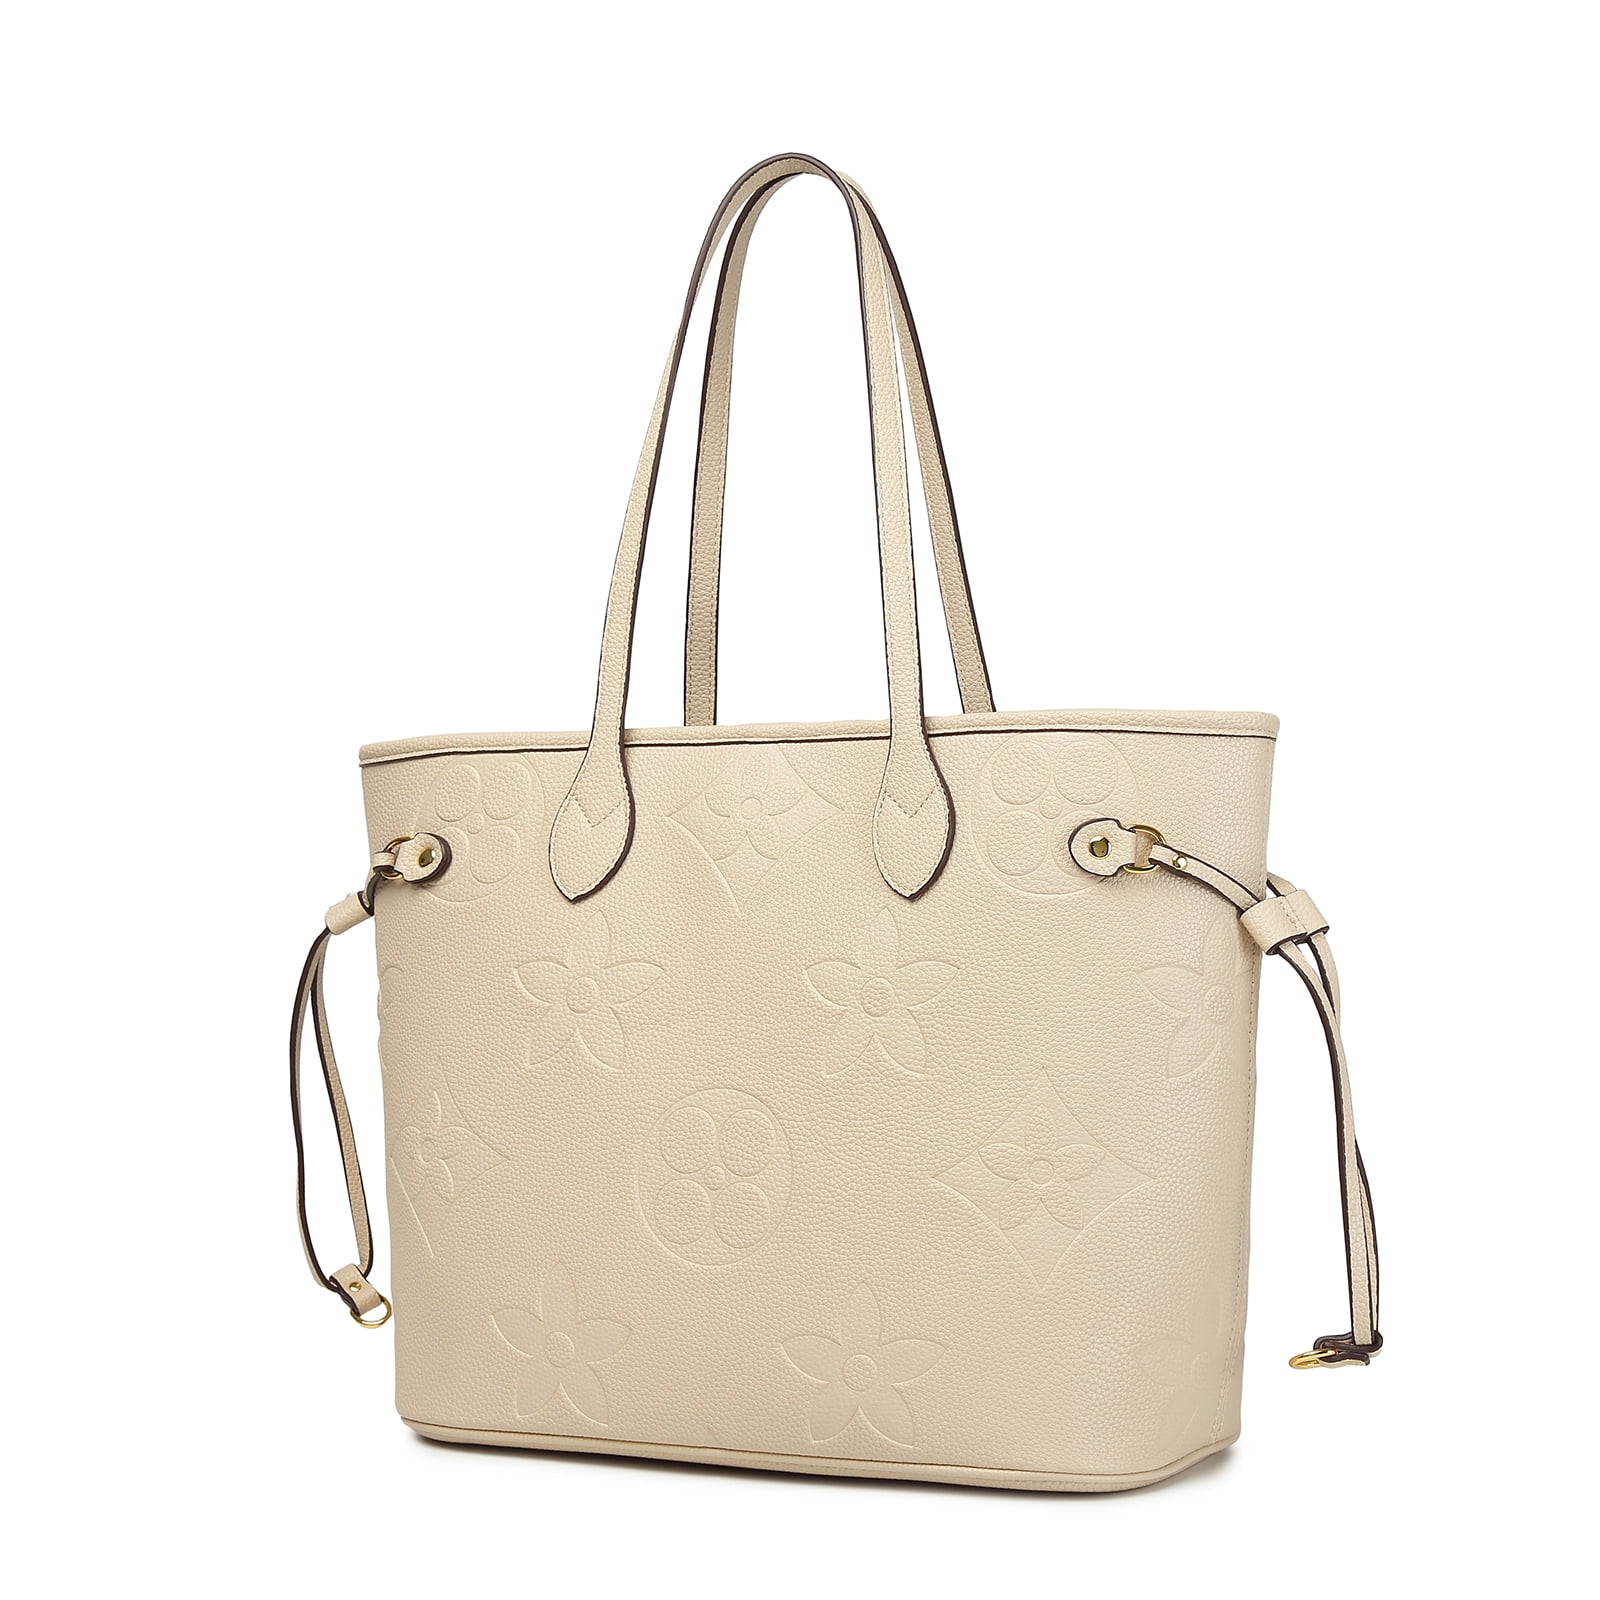 MilaKate Embossed Shoulder Handbags with Inner Pouch for Women – Designer  Inspired Tote Bags. Beige Color. Size: (13.5 X 6.5 X11.5) 